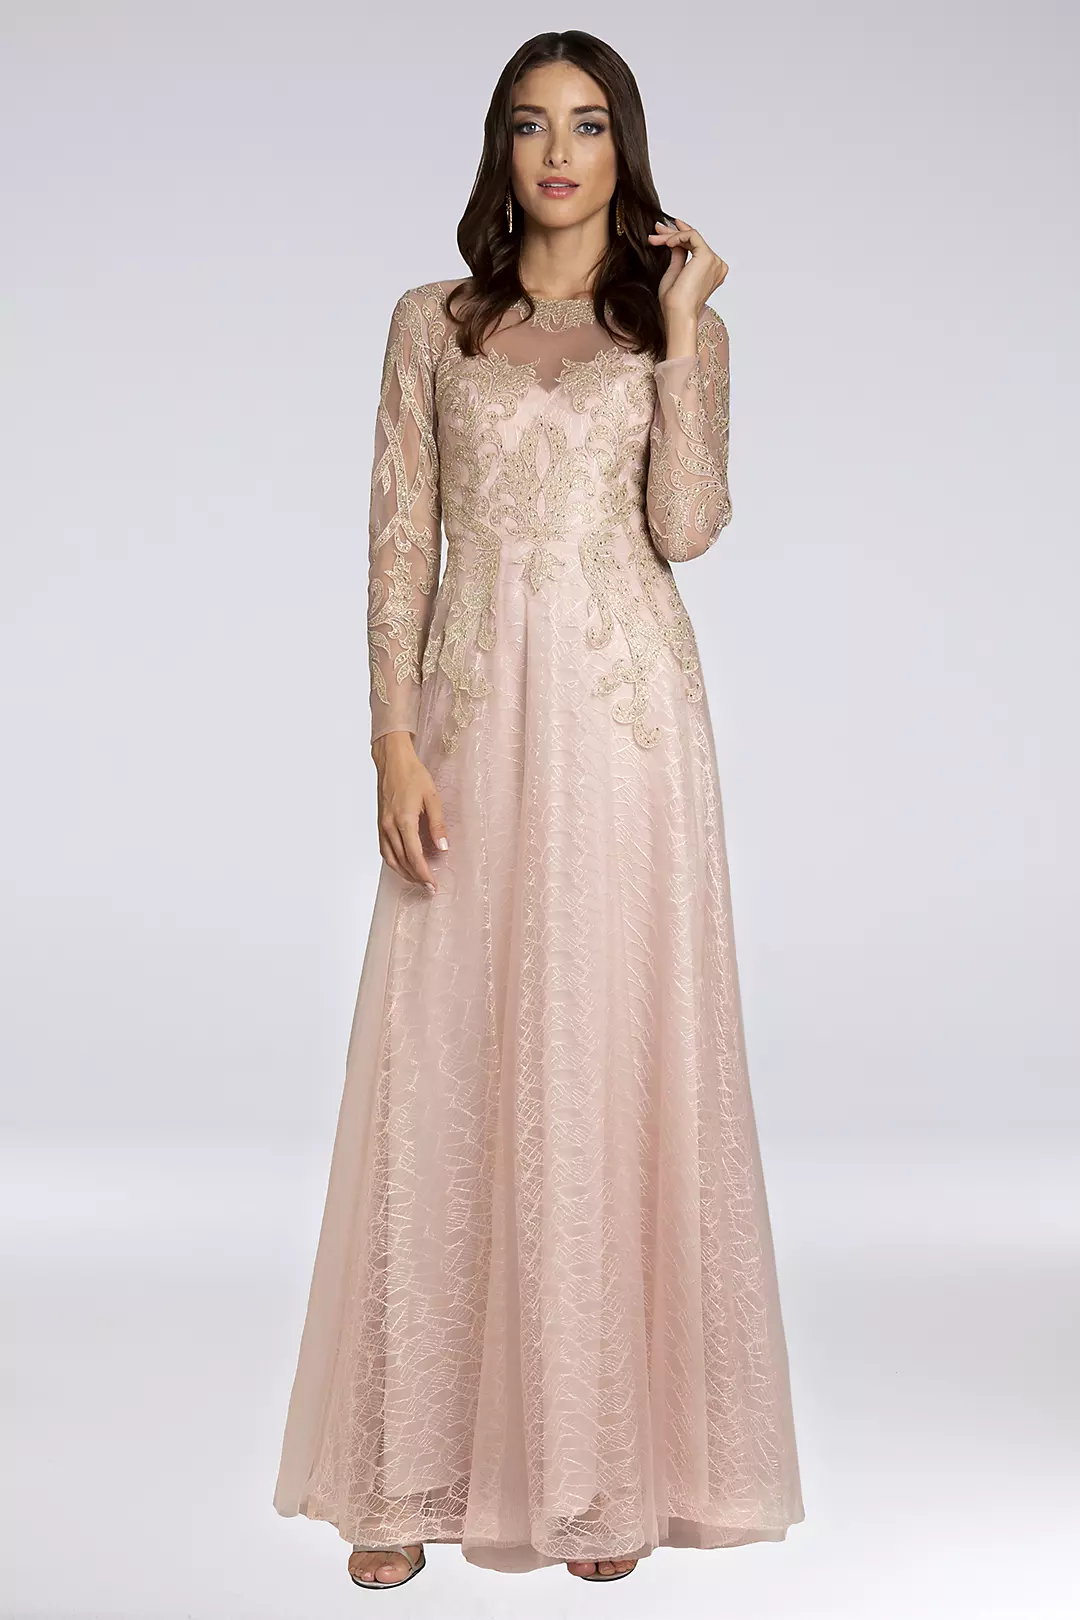 Lara Brianna Lace A-Line Gown with Long Sleeves Image